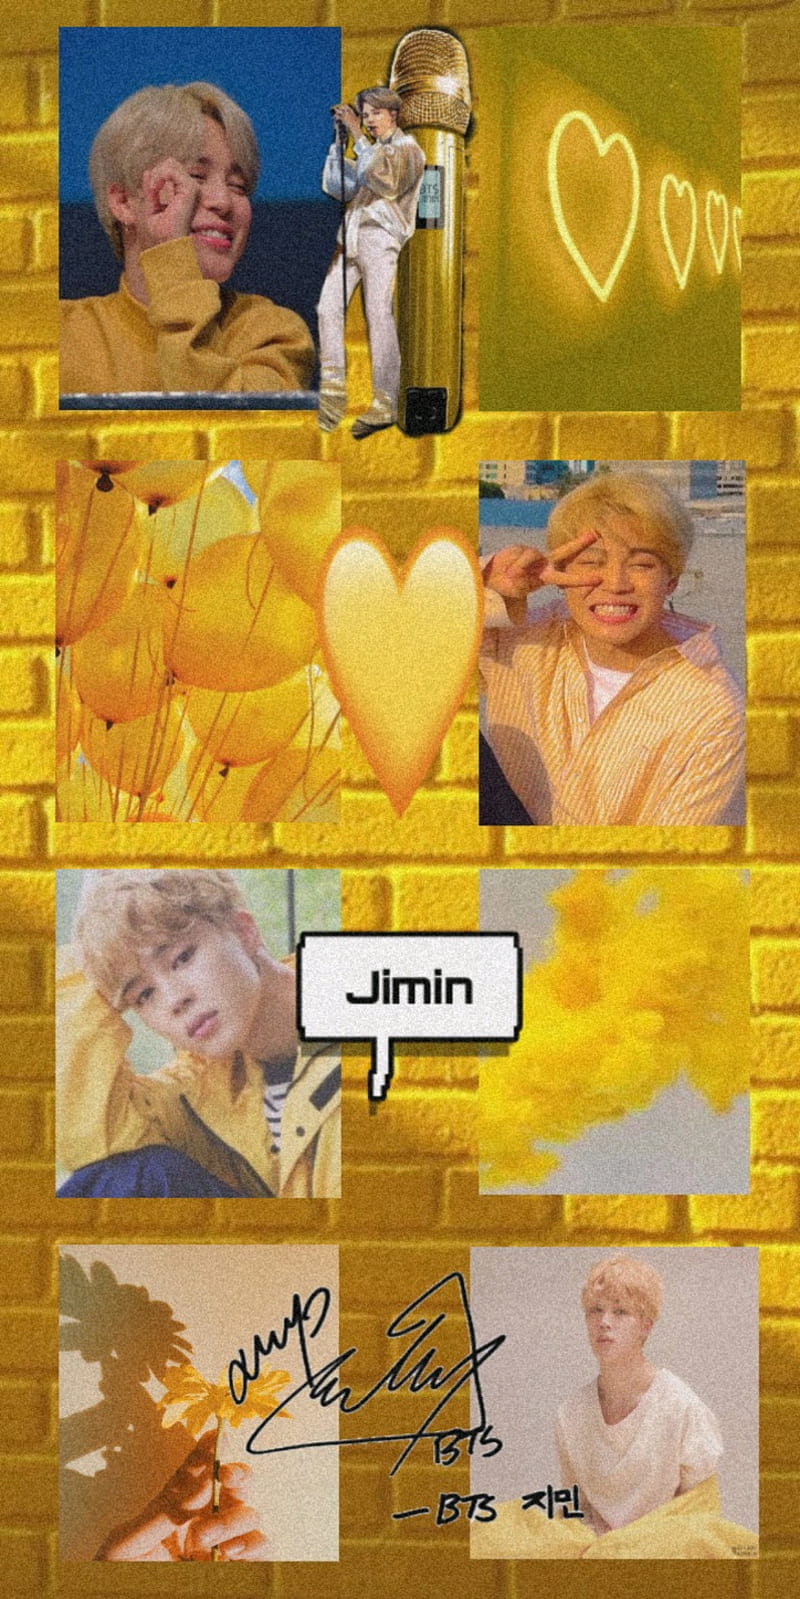 Jimin wallpaper made by me! Credit to the original artist if you use it! - Jimin